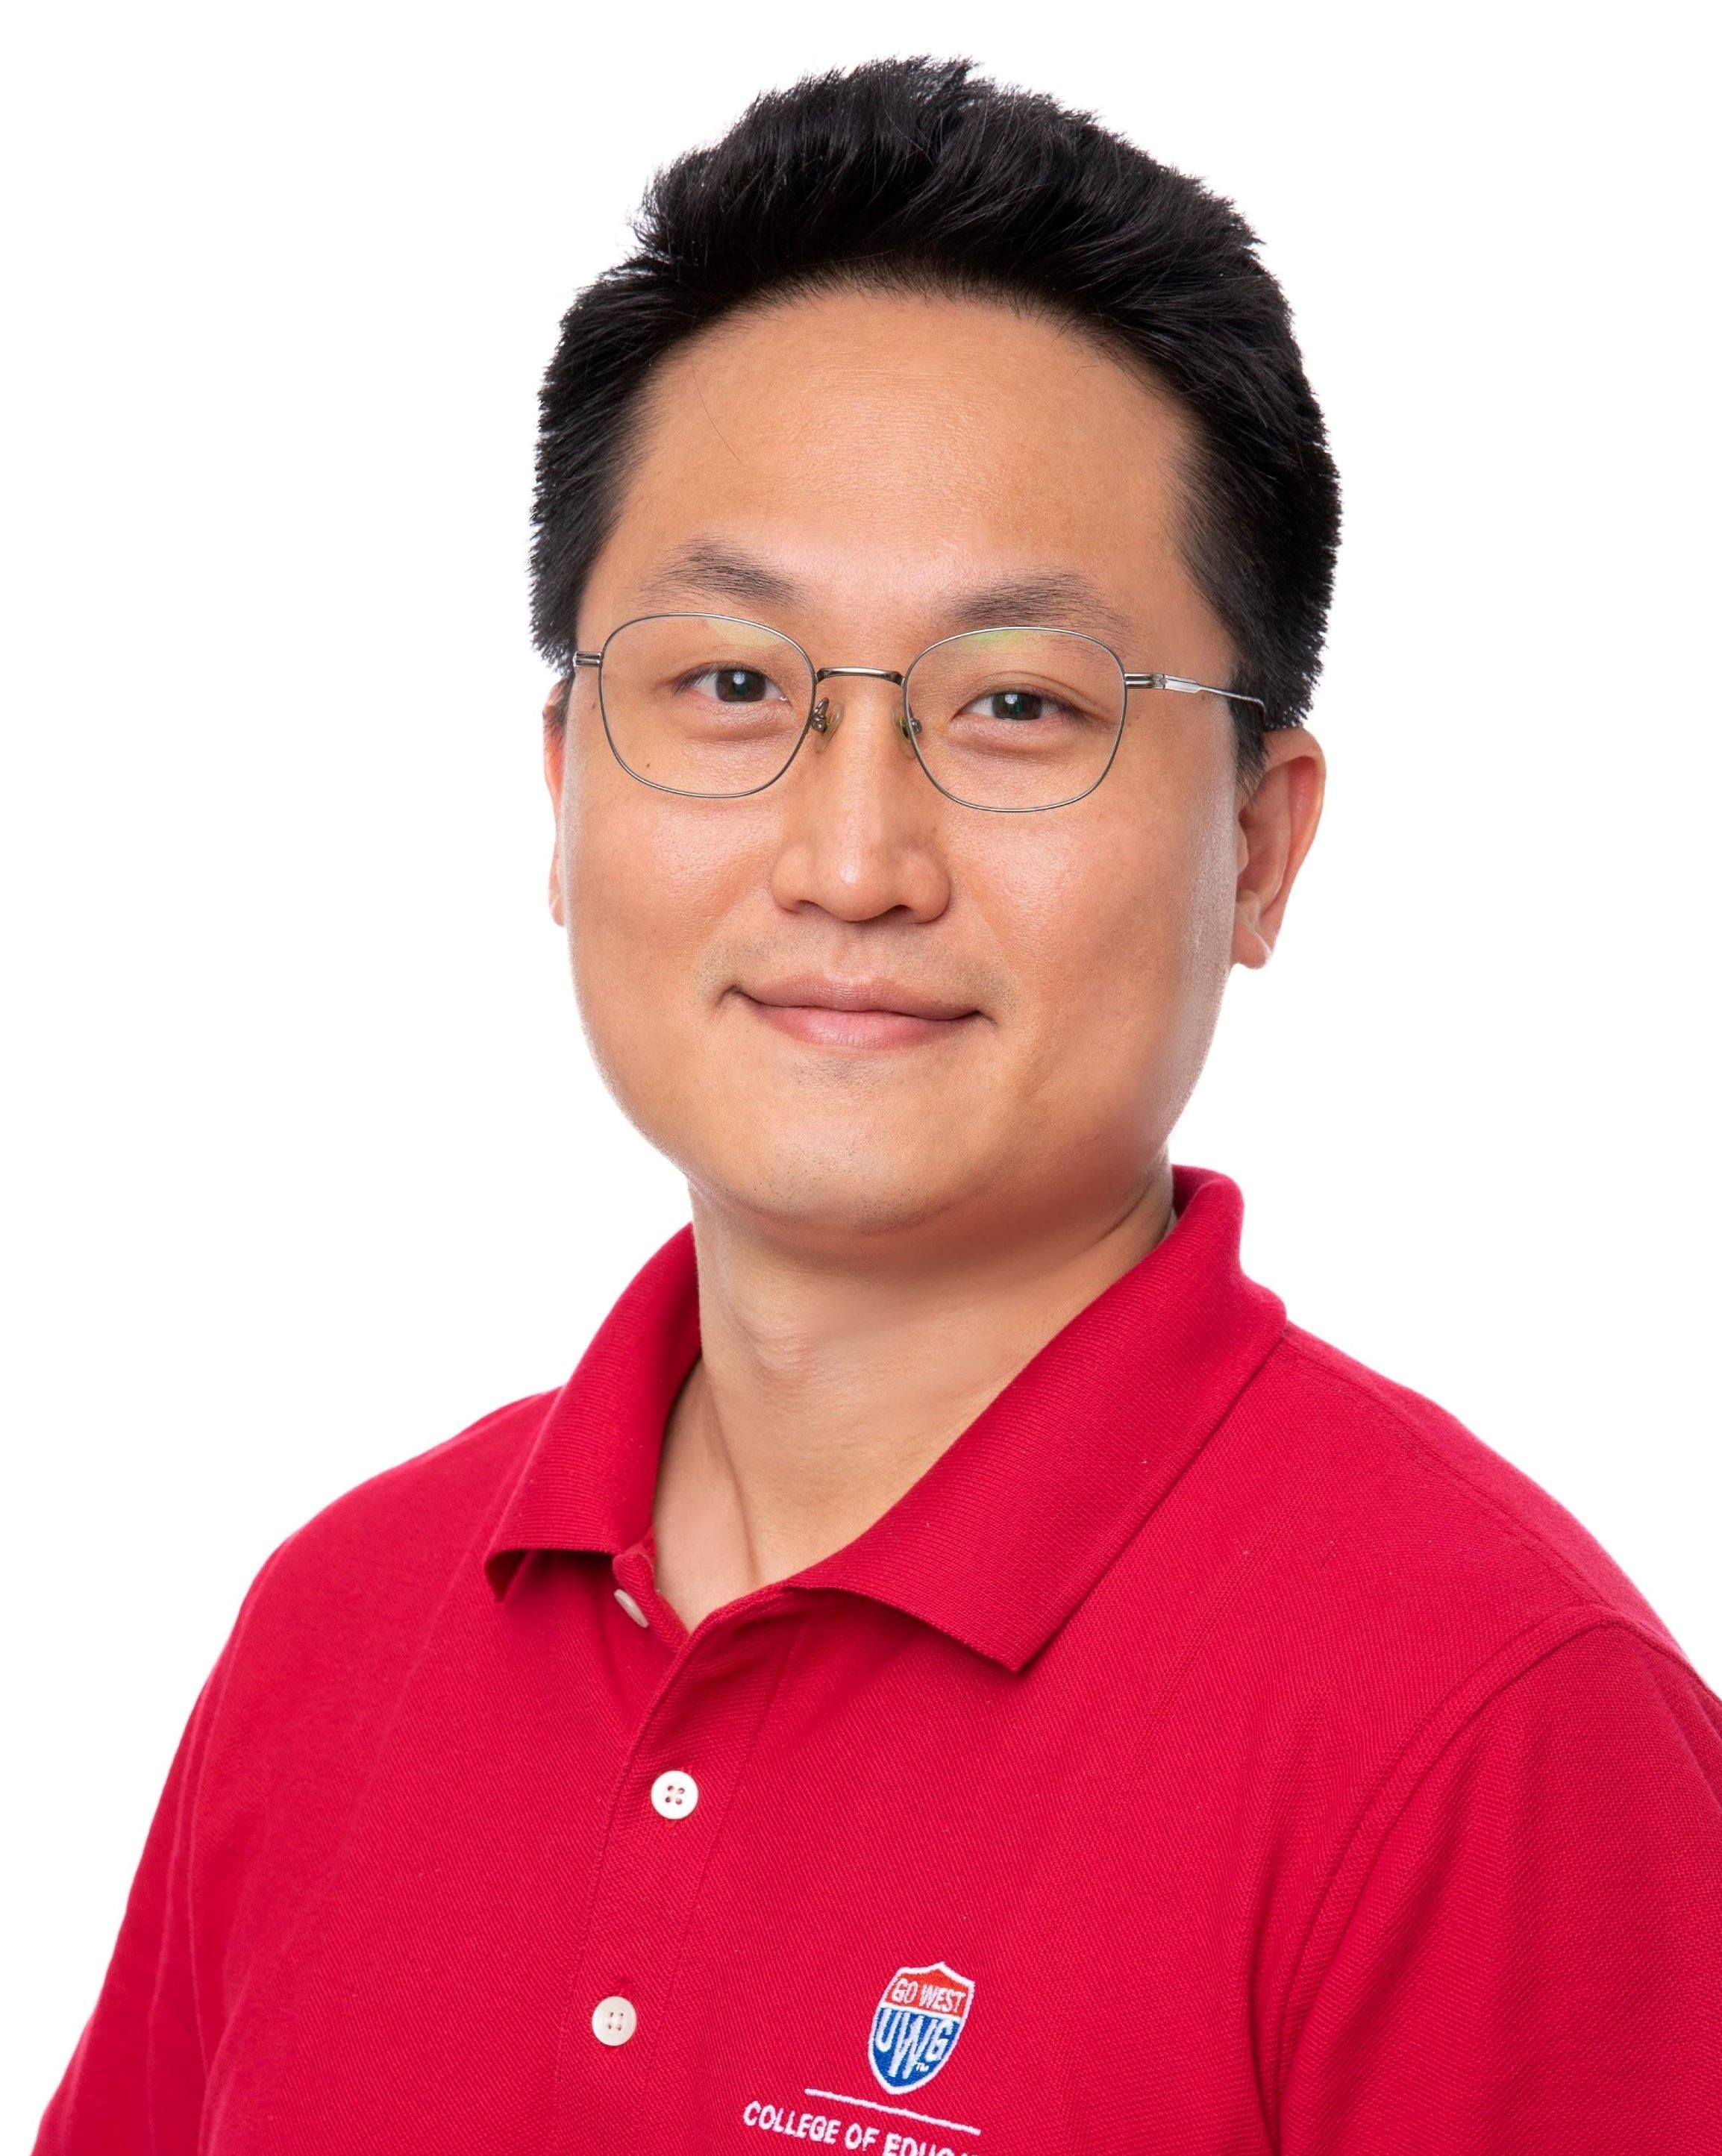 Wooyoung (William) Jang, Ph.D.